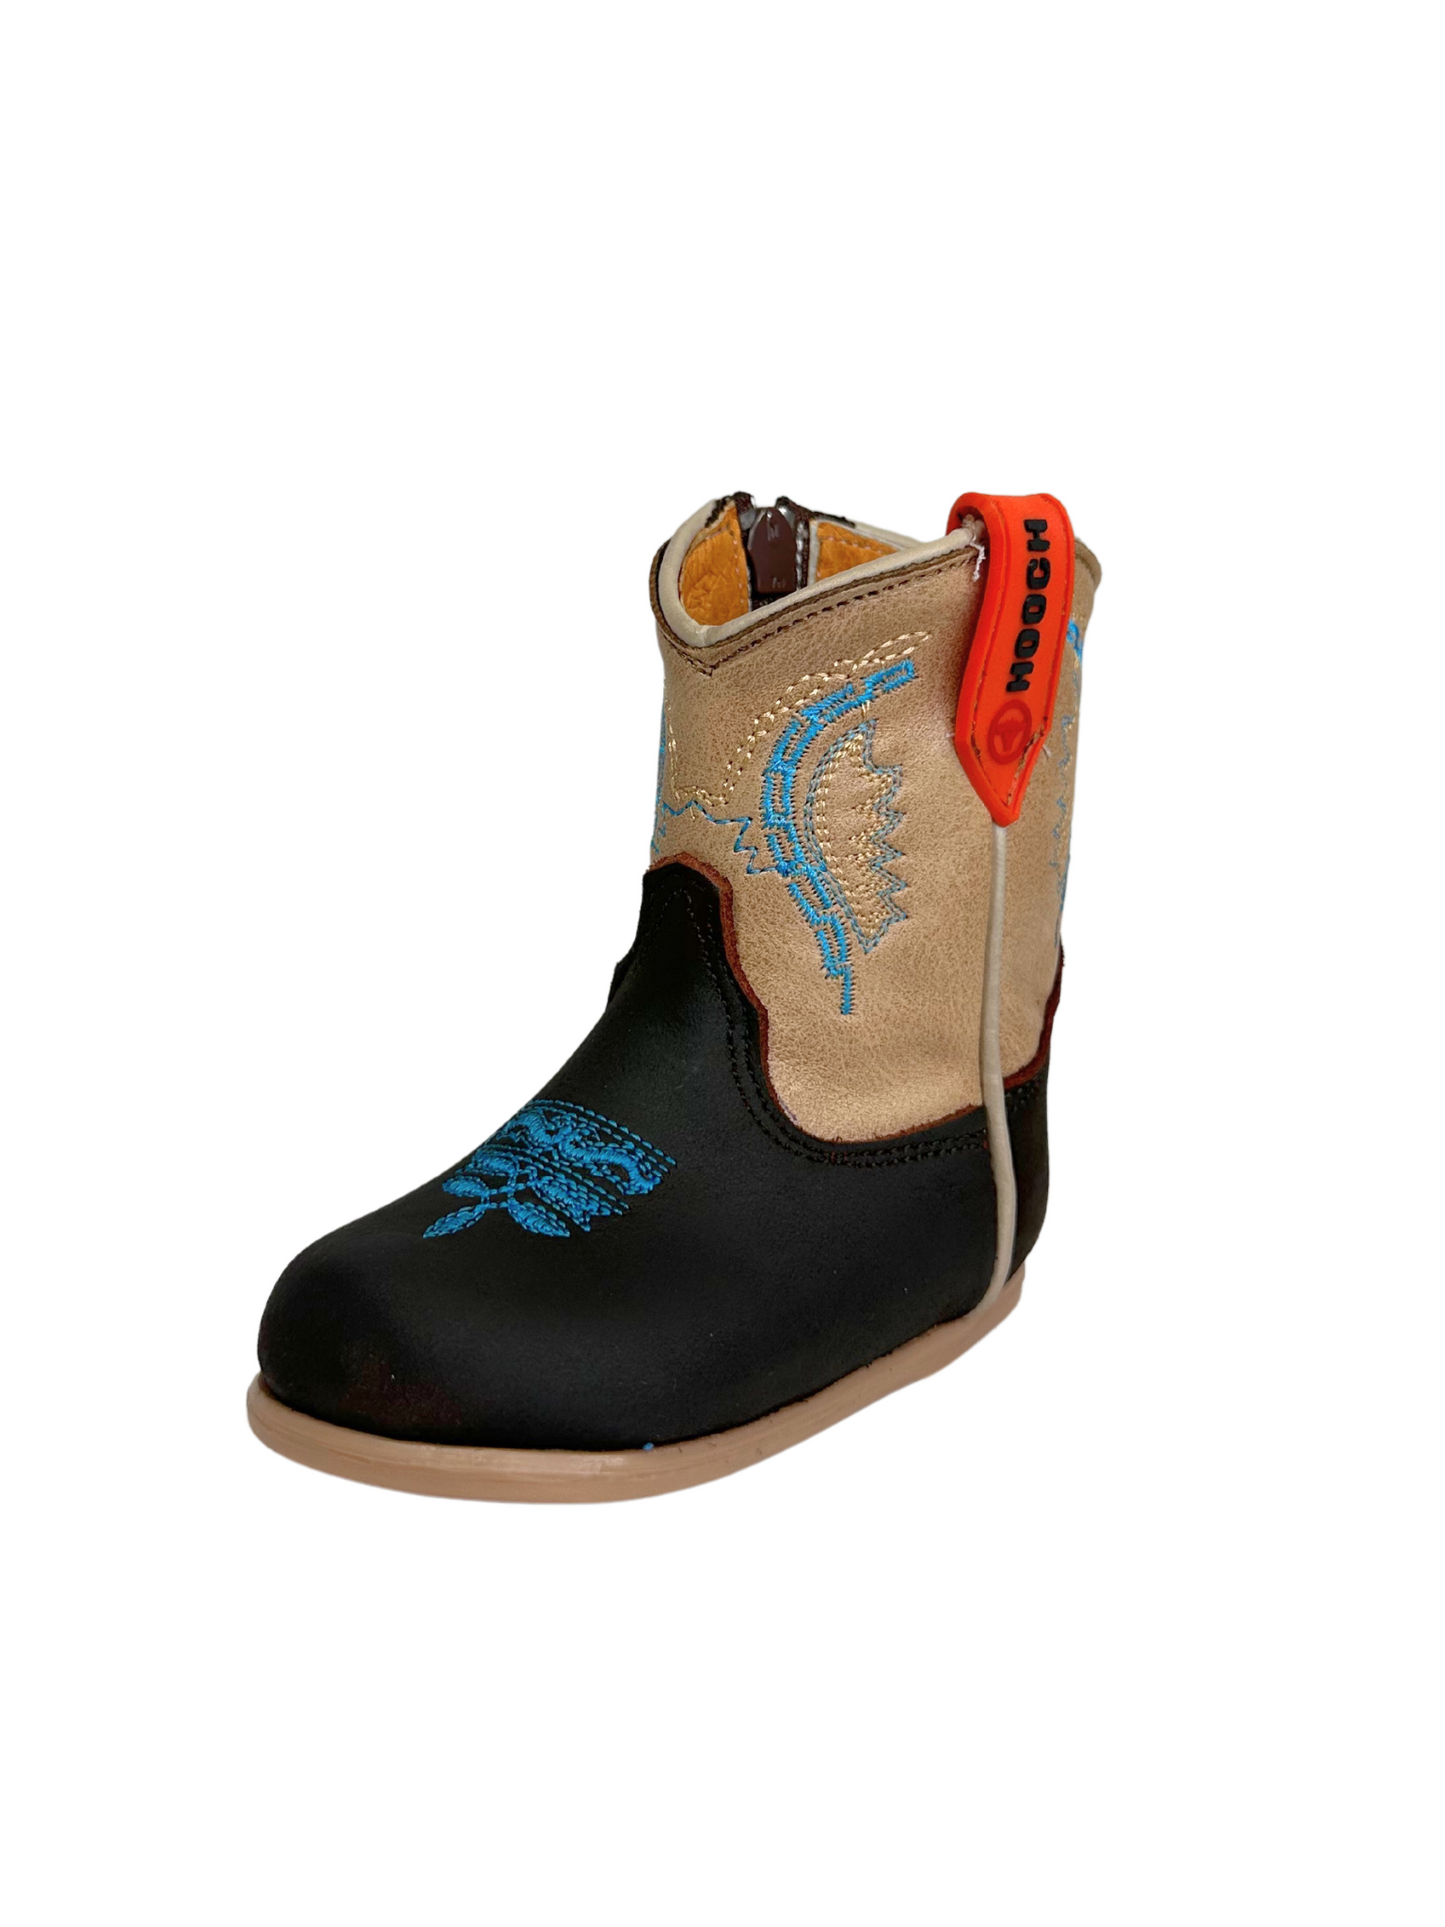 Hooch Toddler's Brown & Blue Stitched Boot